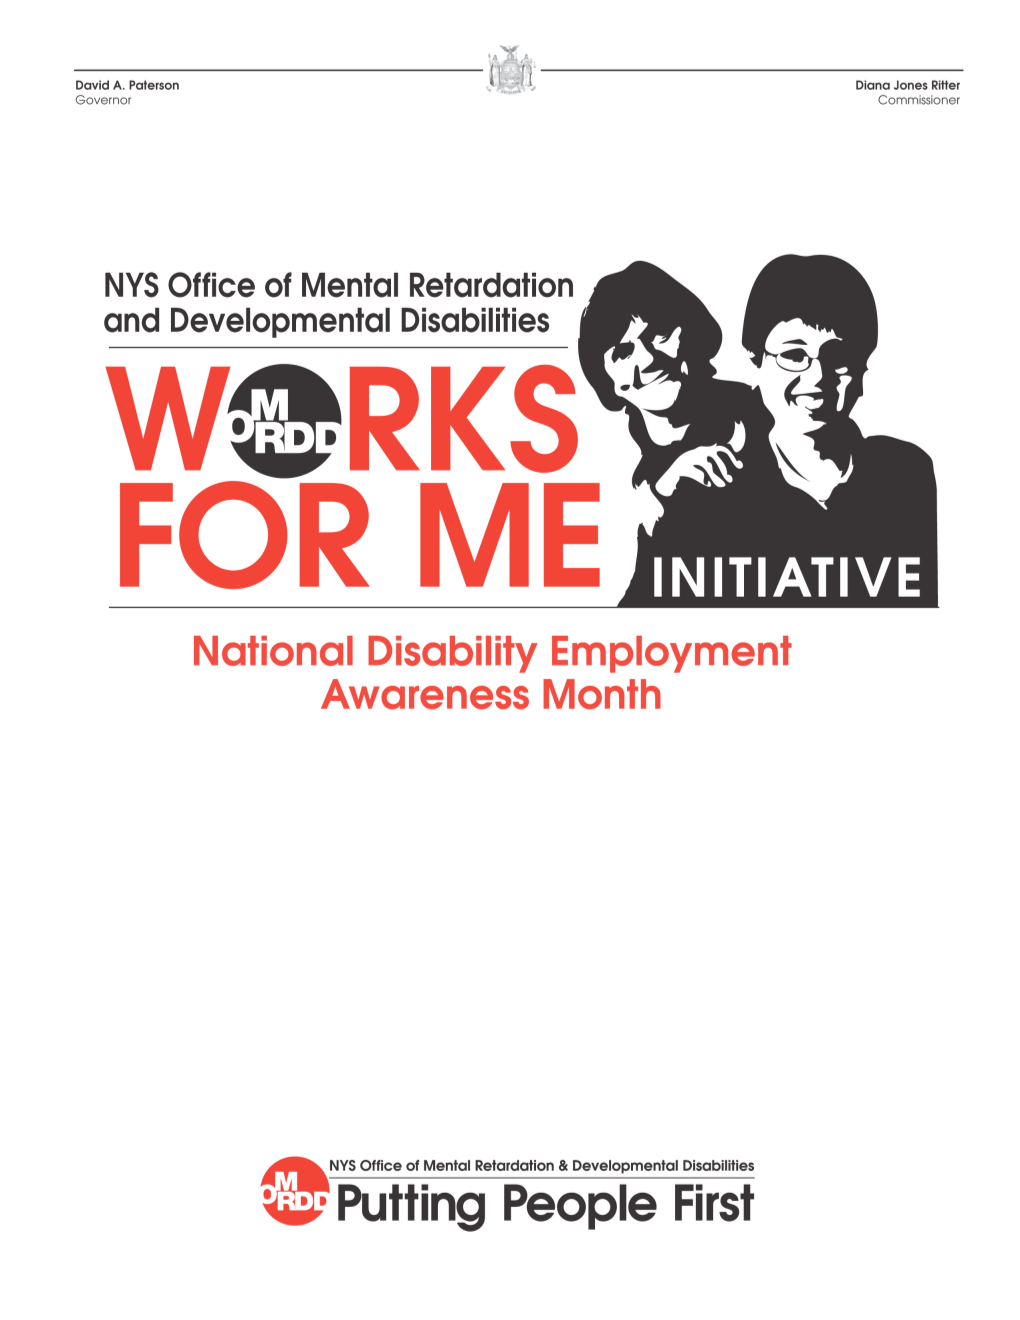 National Disability Employment